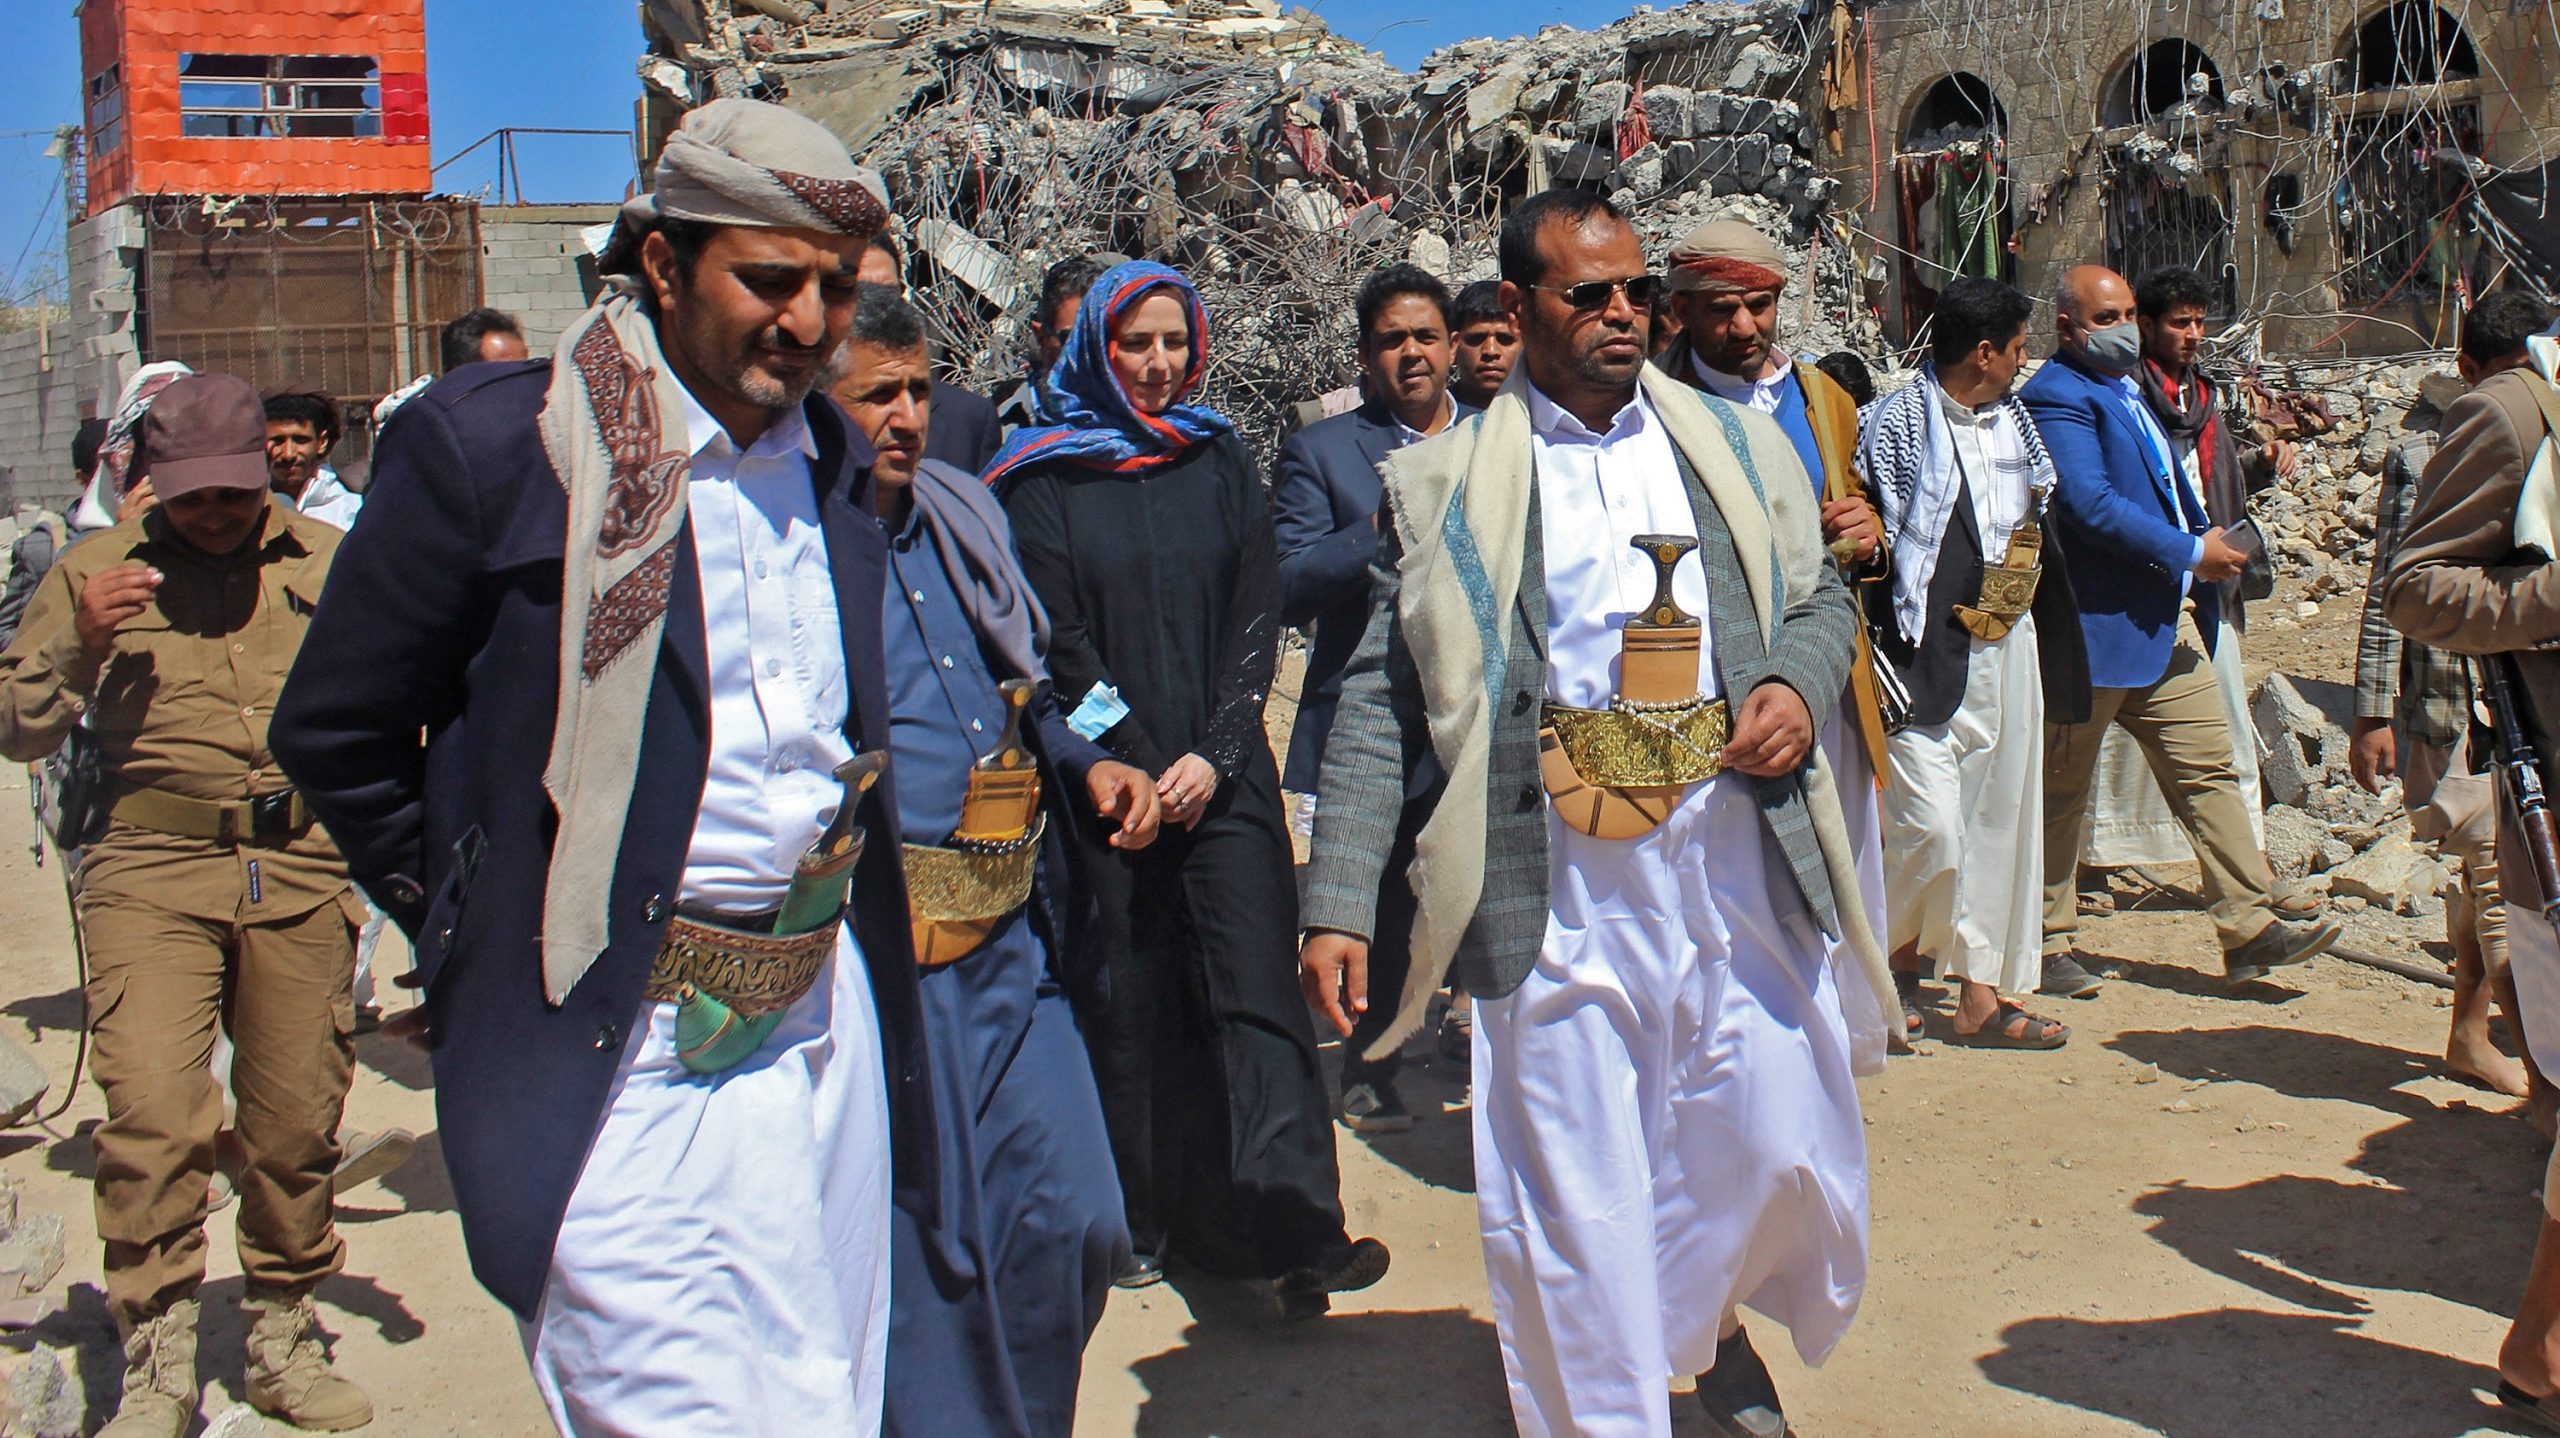 The Houthis: Who Are They and What Do They Want?